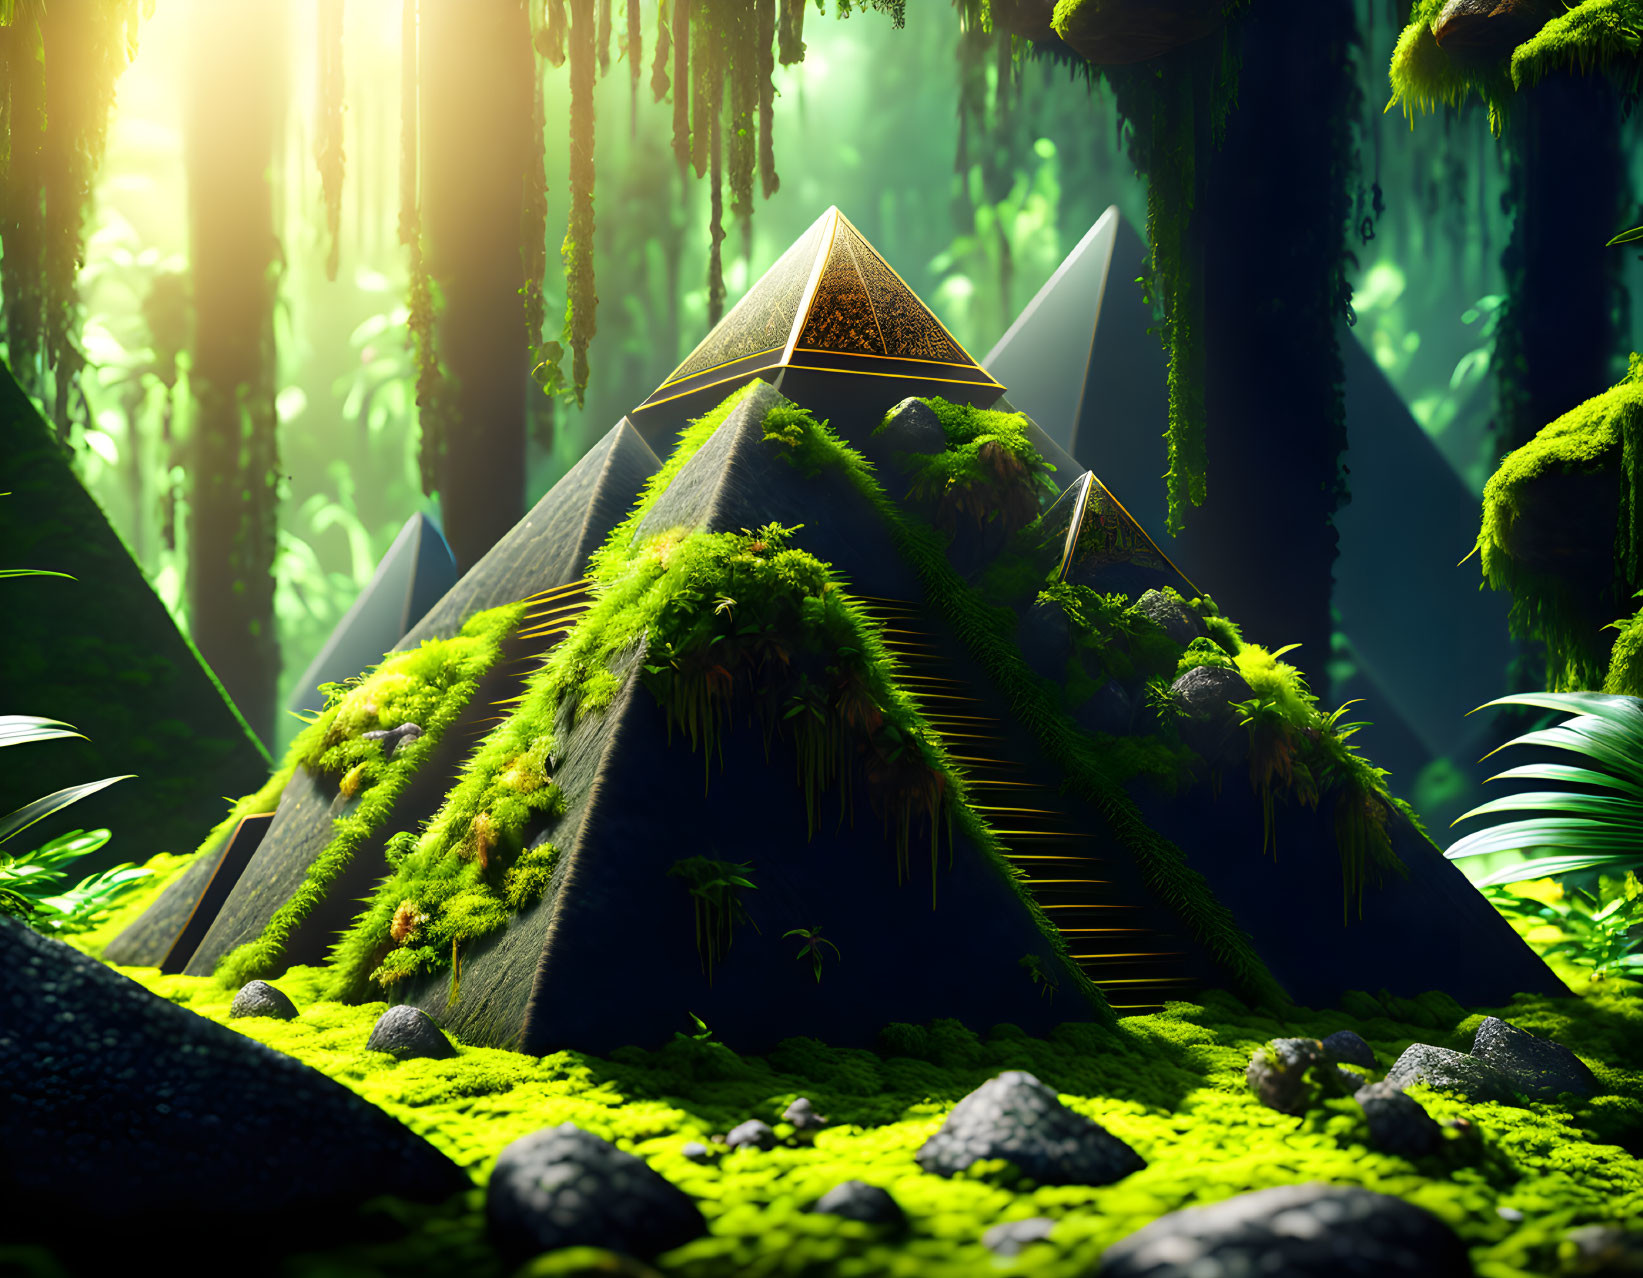 Moss-covered pyramids in mystical forest sunlight